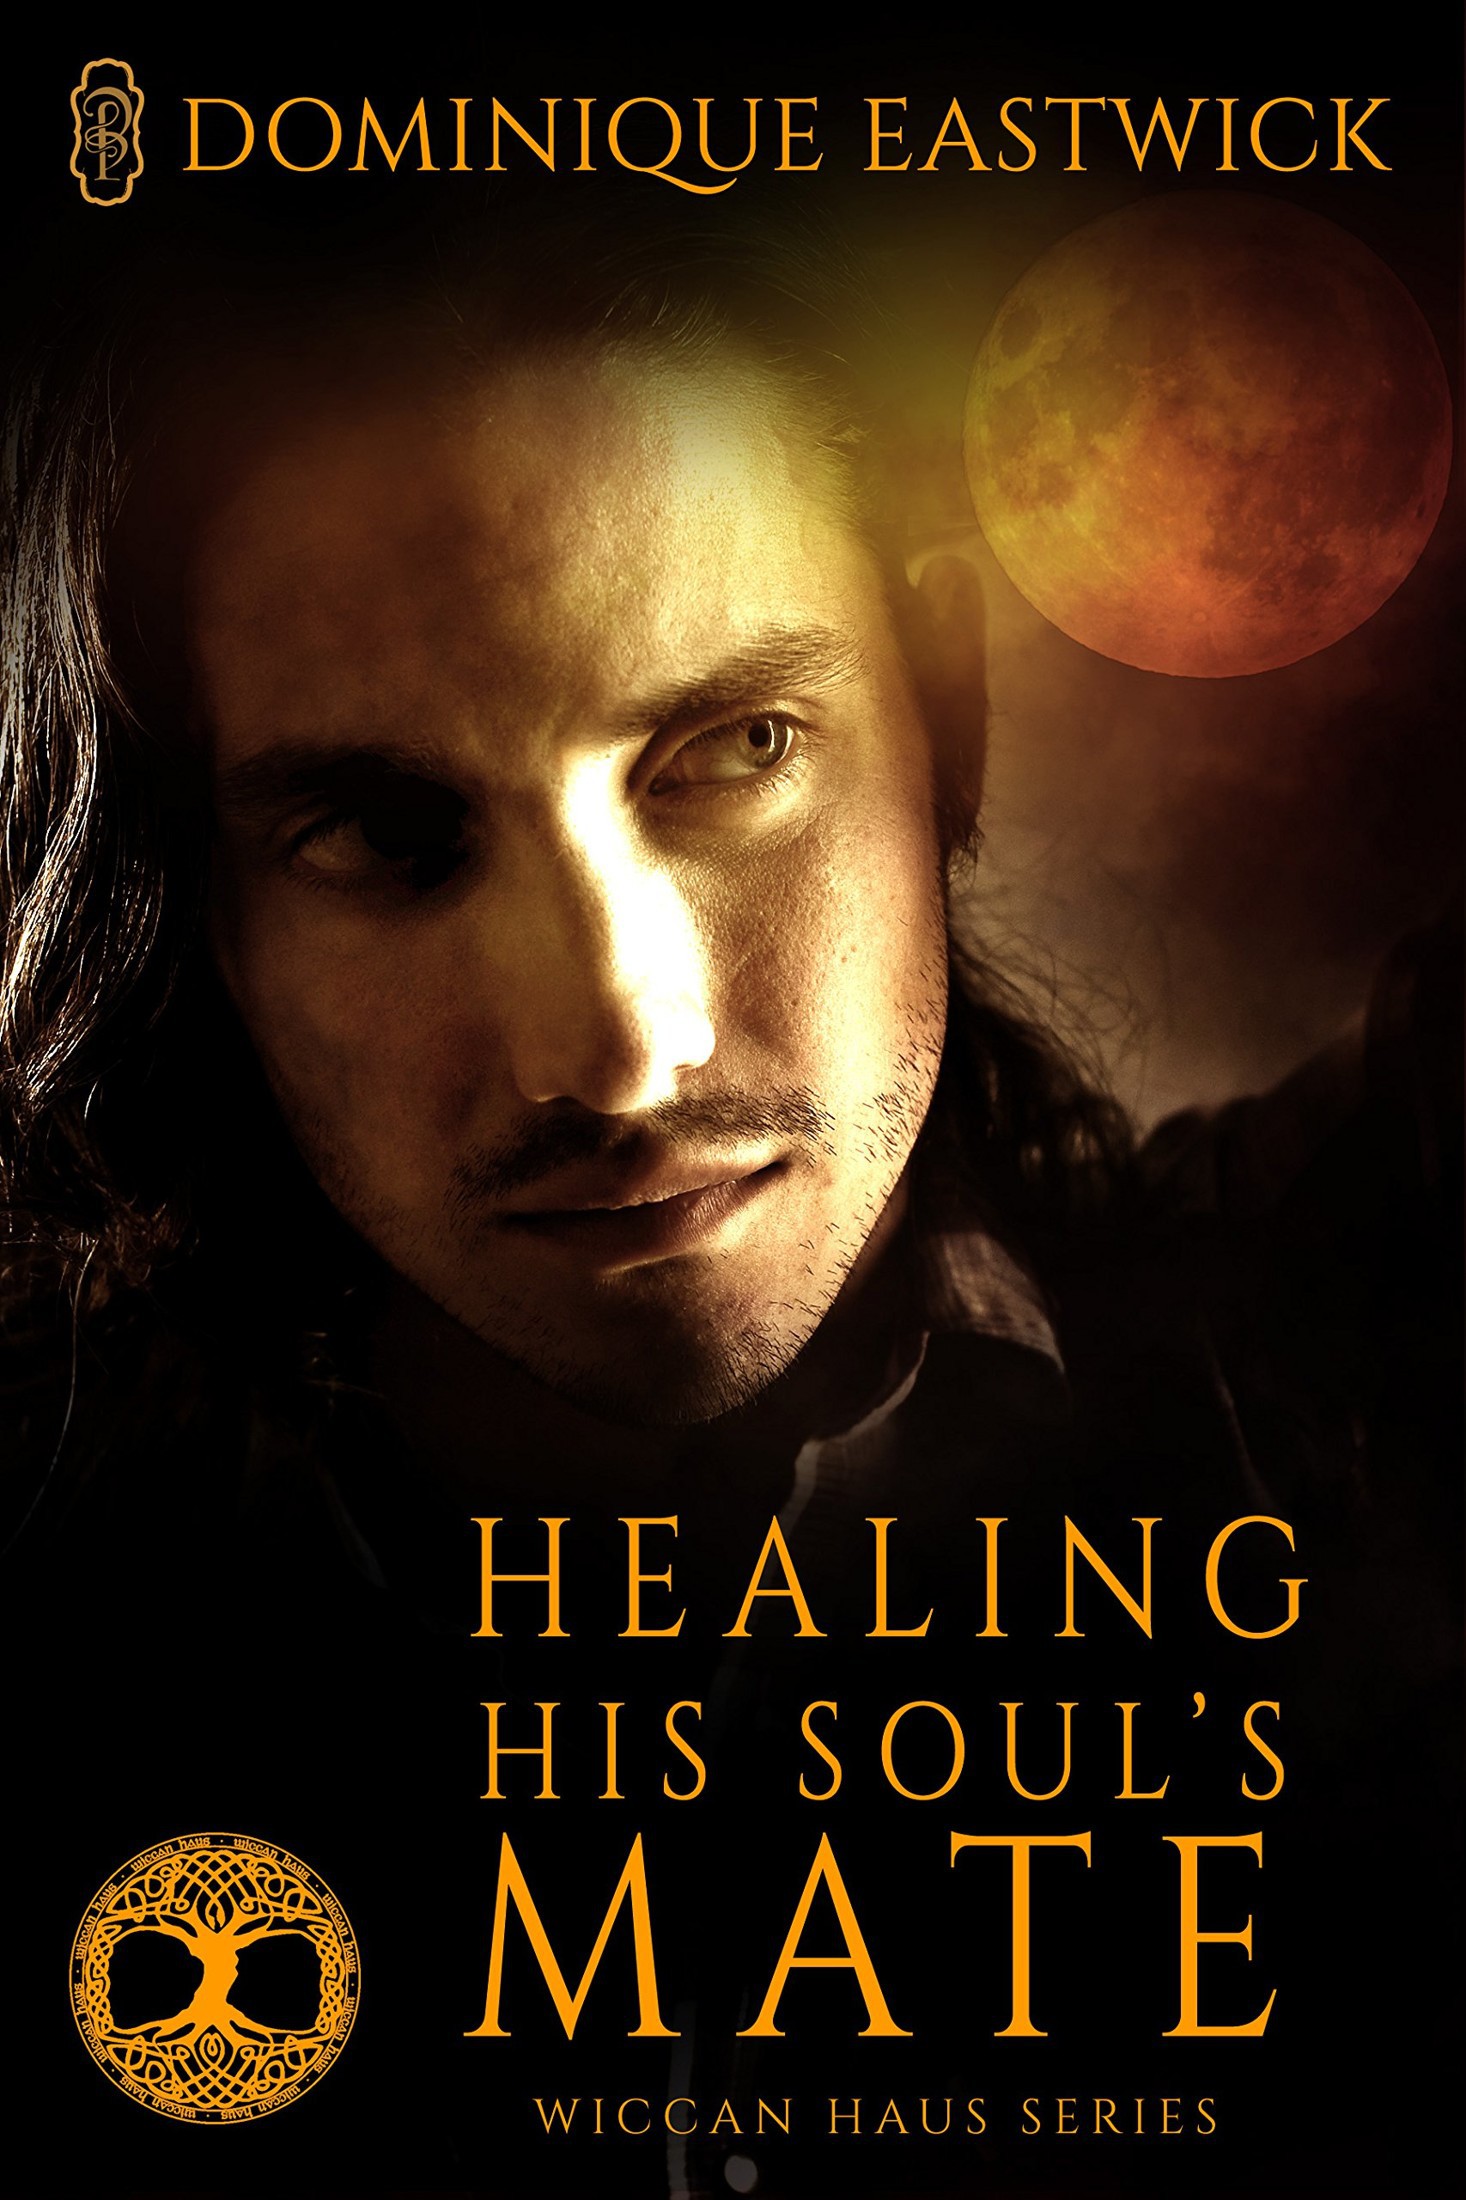 Healing His Soul’s Mate by Dominique Eastwick